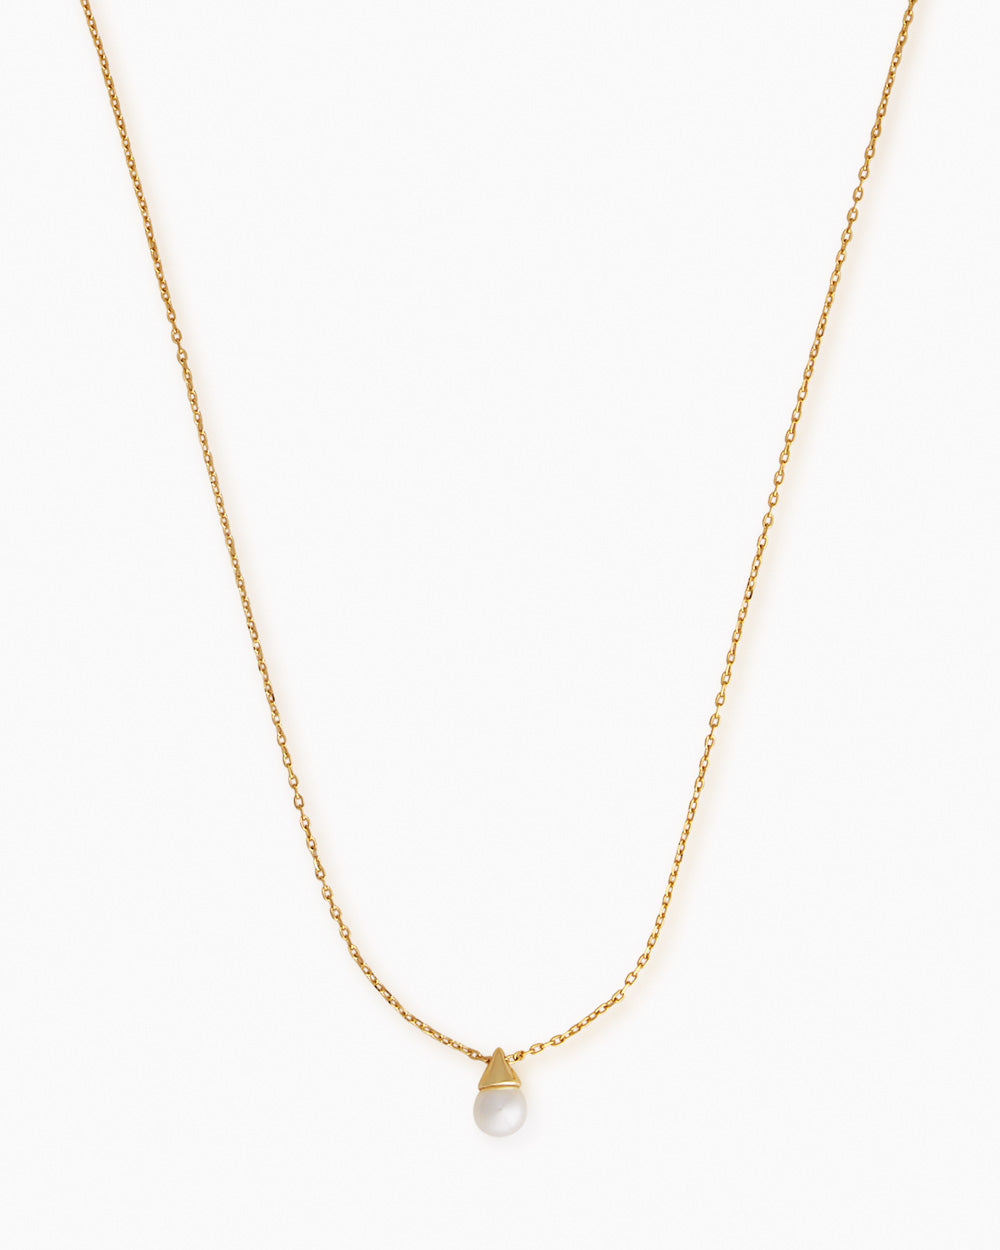 The Alicia, a classic pearl pendant necklace with a freshwater pearl and a delicate golden chain